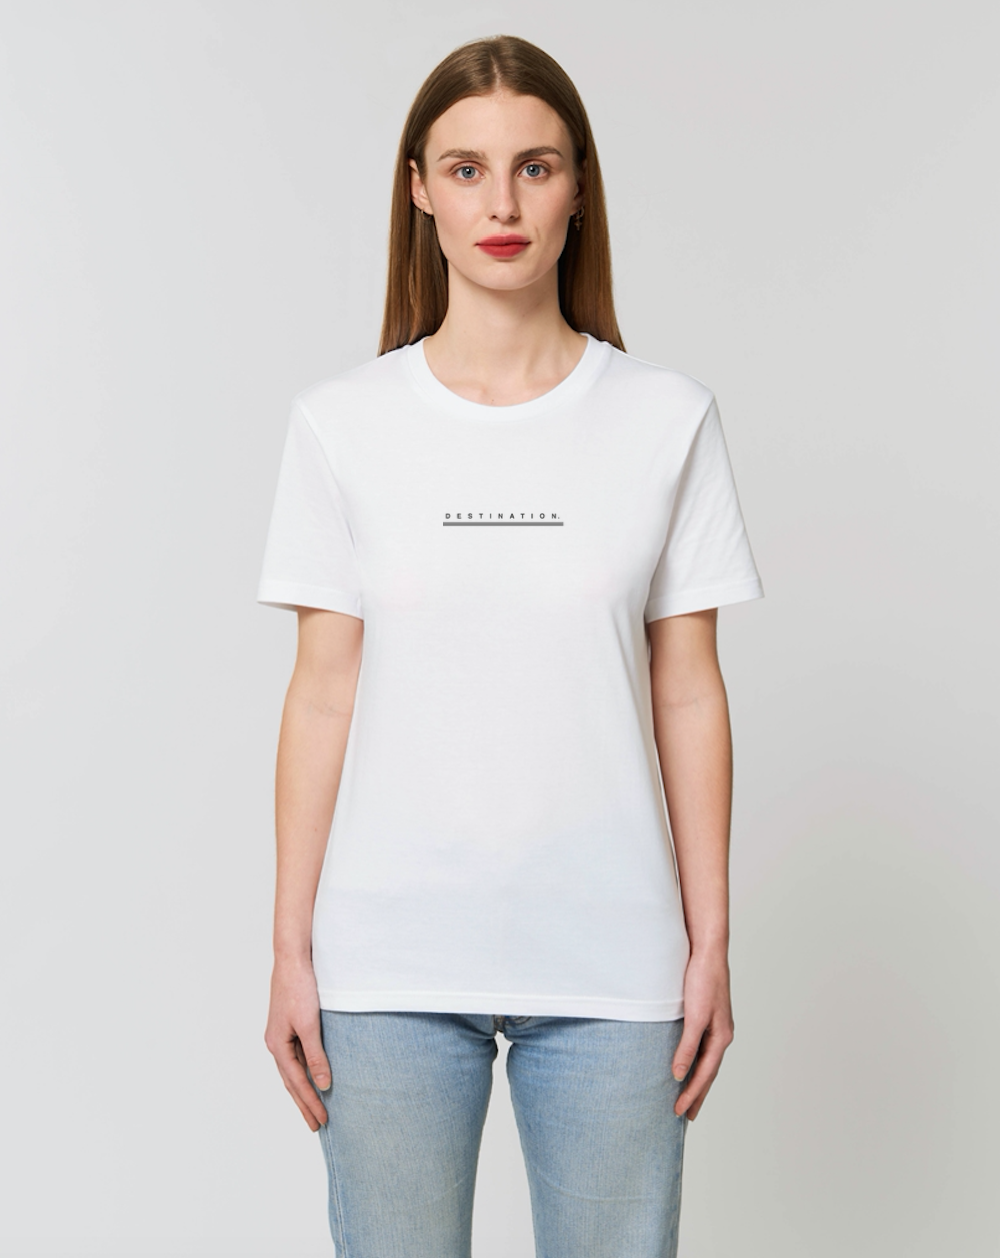 Unisex T-Shirt - 100% of profits donated to Disasters Emergency Committee